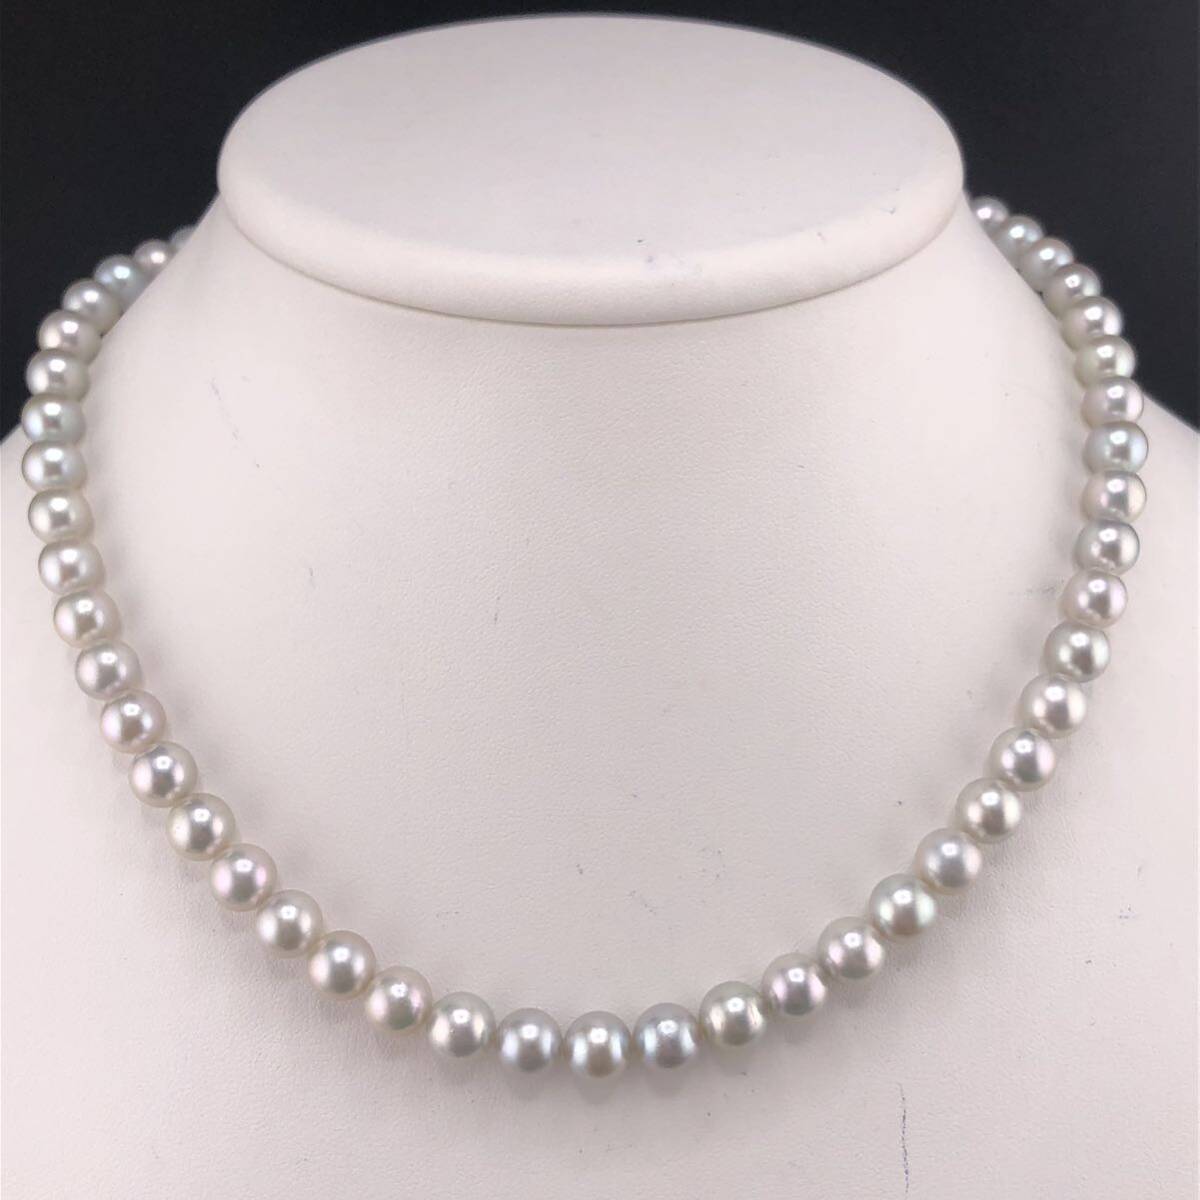 E03-6236 アコヤパールネックレス 7.0mm~7.5mm 41cm 33.8g ( アコヤ真珠 Pearl necklace SILVER )の画像1